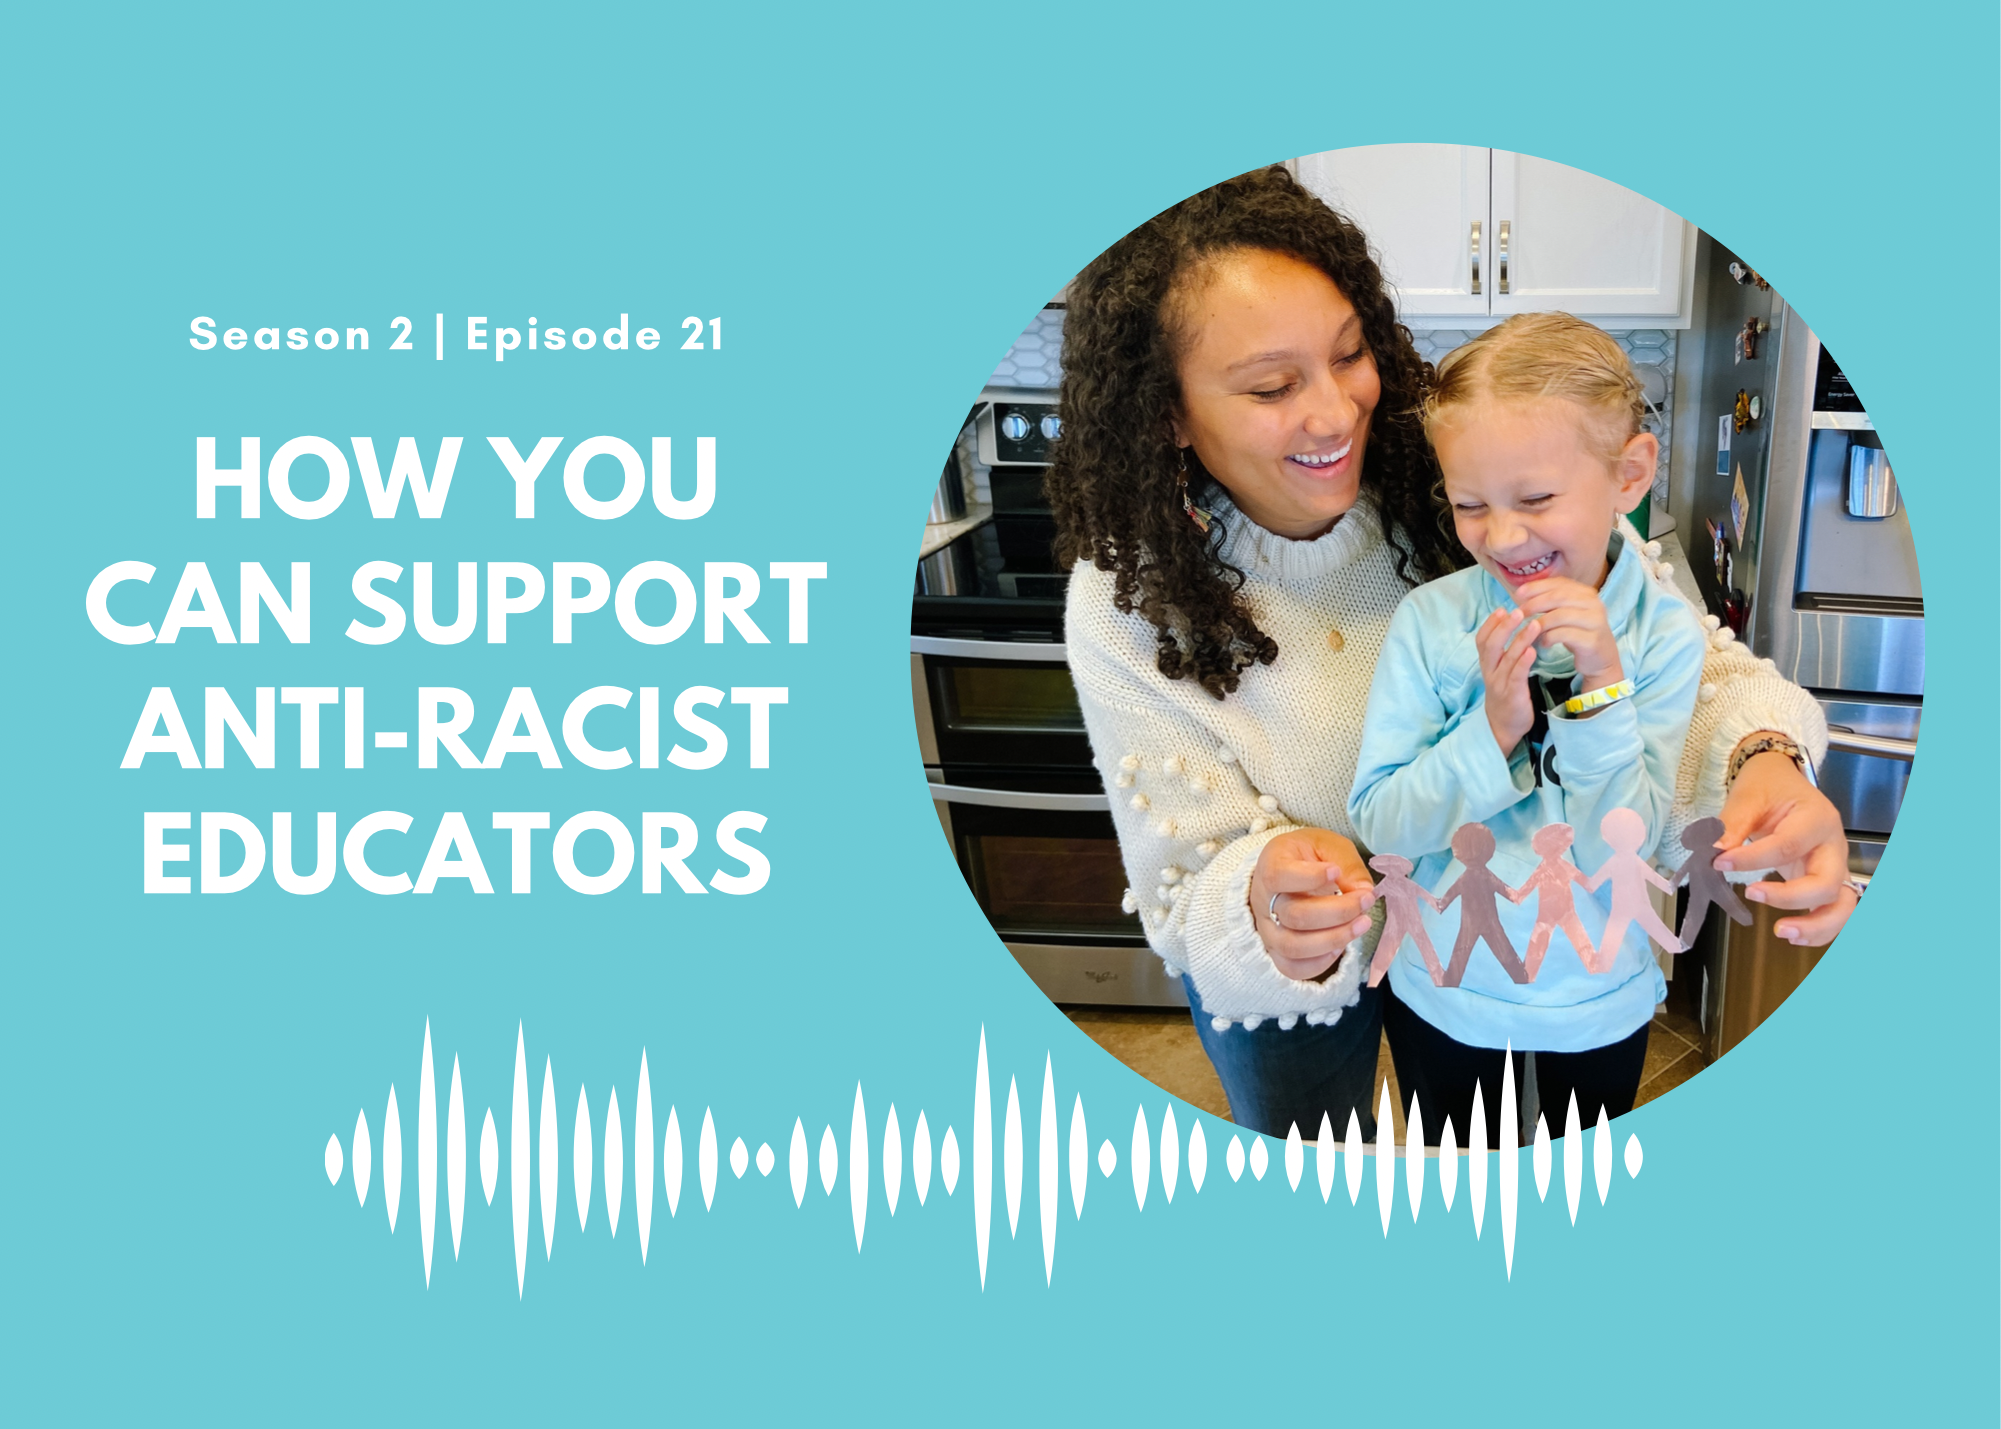 How You Can Support Anti-racist Educators